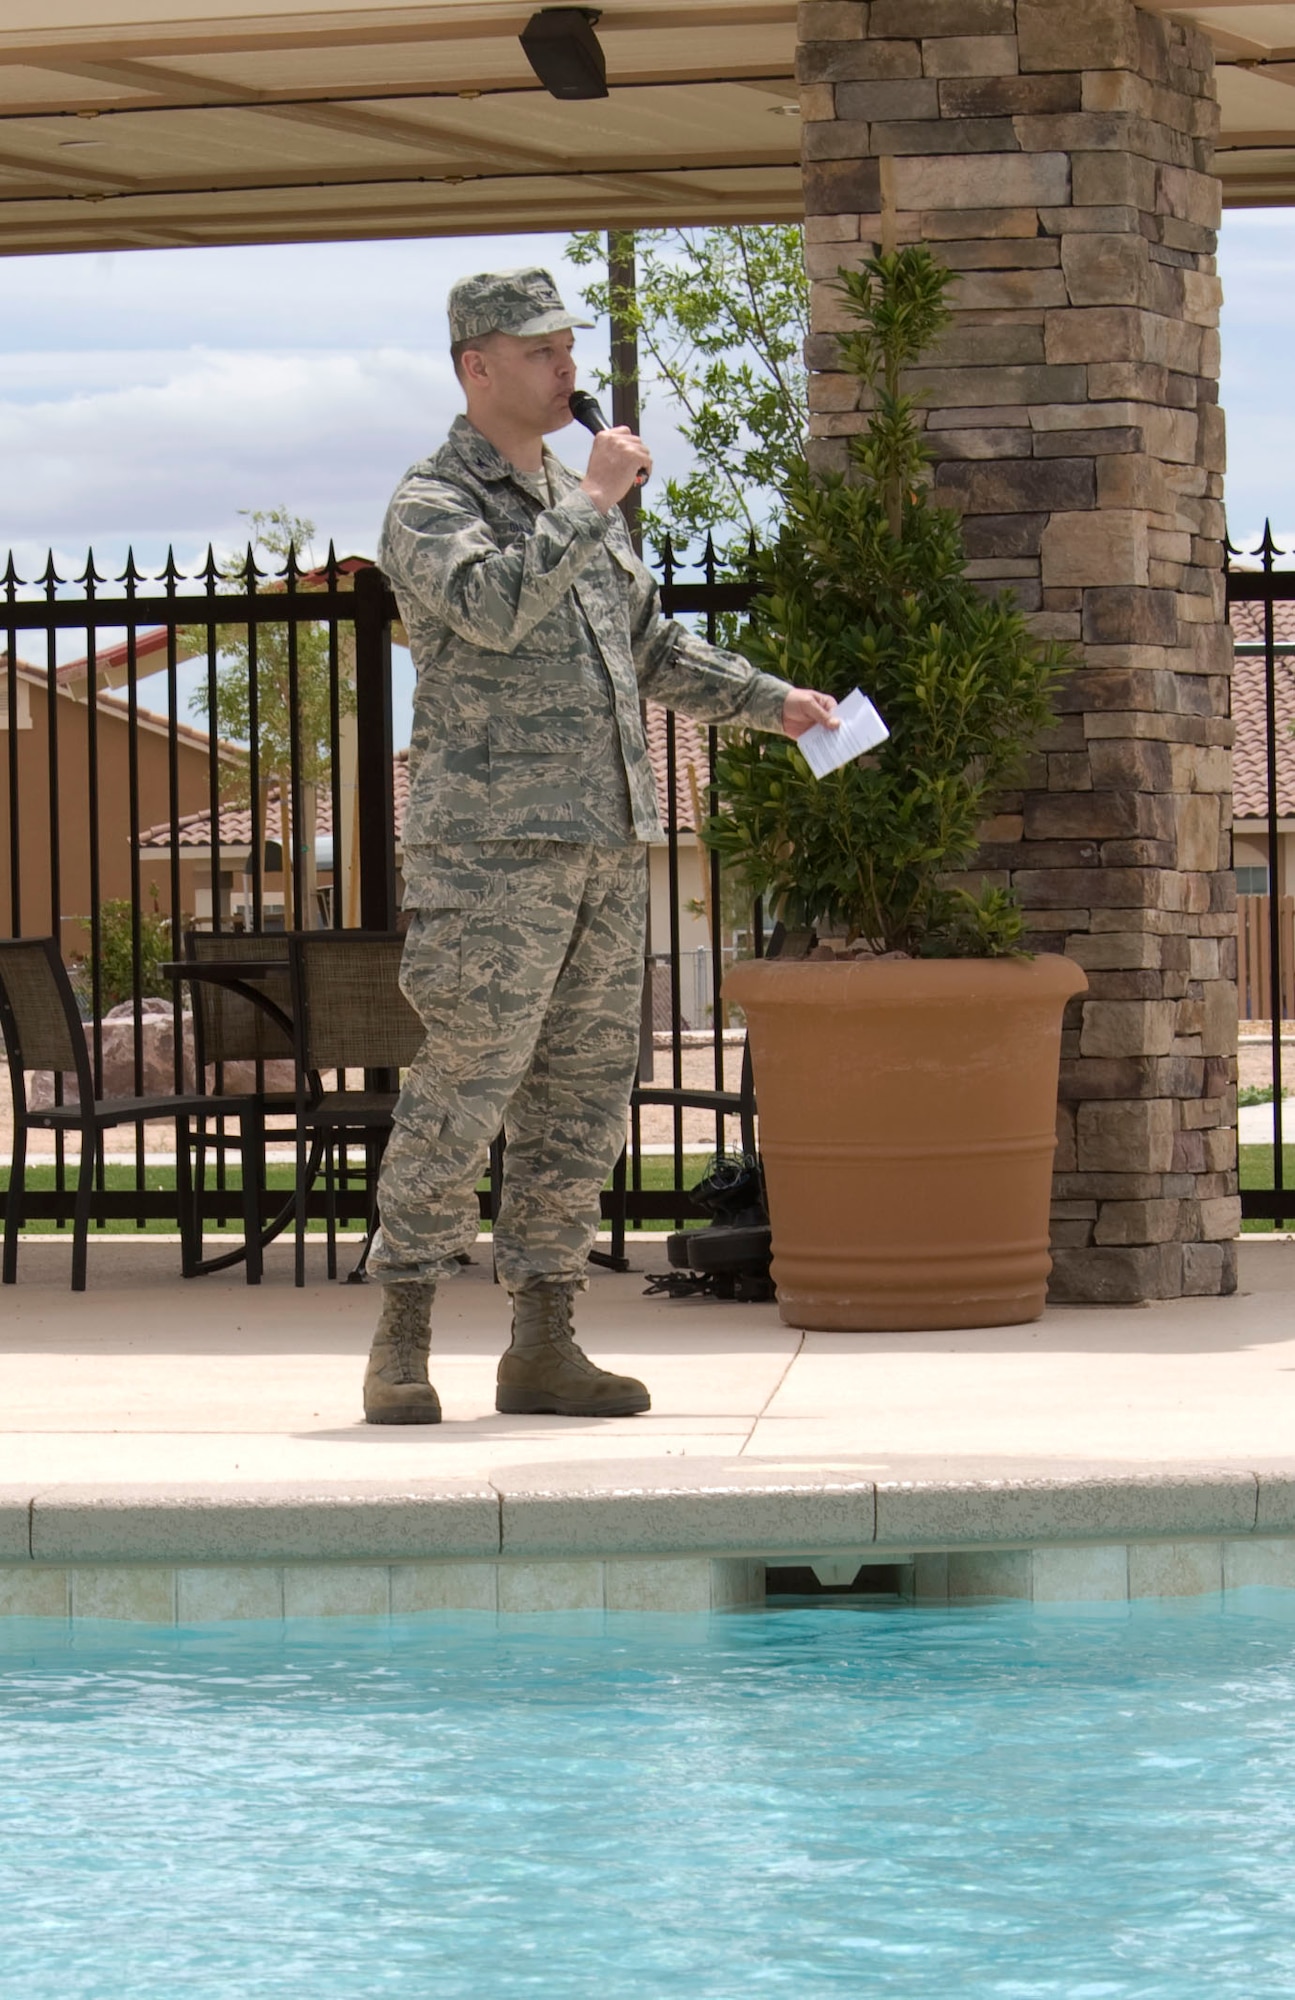 NELLIS AIR FORCE BASE, Nev.-- Col. Steven Garland, 99th Air Base Wing commander, speaks during the recreational pool completion ceremony May 17.  The pool area, which is more than 4,700 square feet and can hold up to 450 people, was designed for base residents and their families and will open June 4. Construction began in 2009 with the assistance of Hunt Military Communities.  (U.S Air Force photo by Senior Airman Stephanie Rubi)